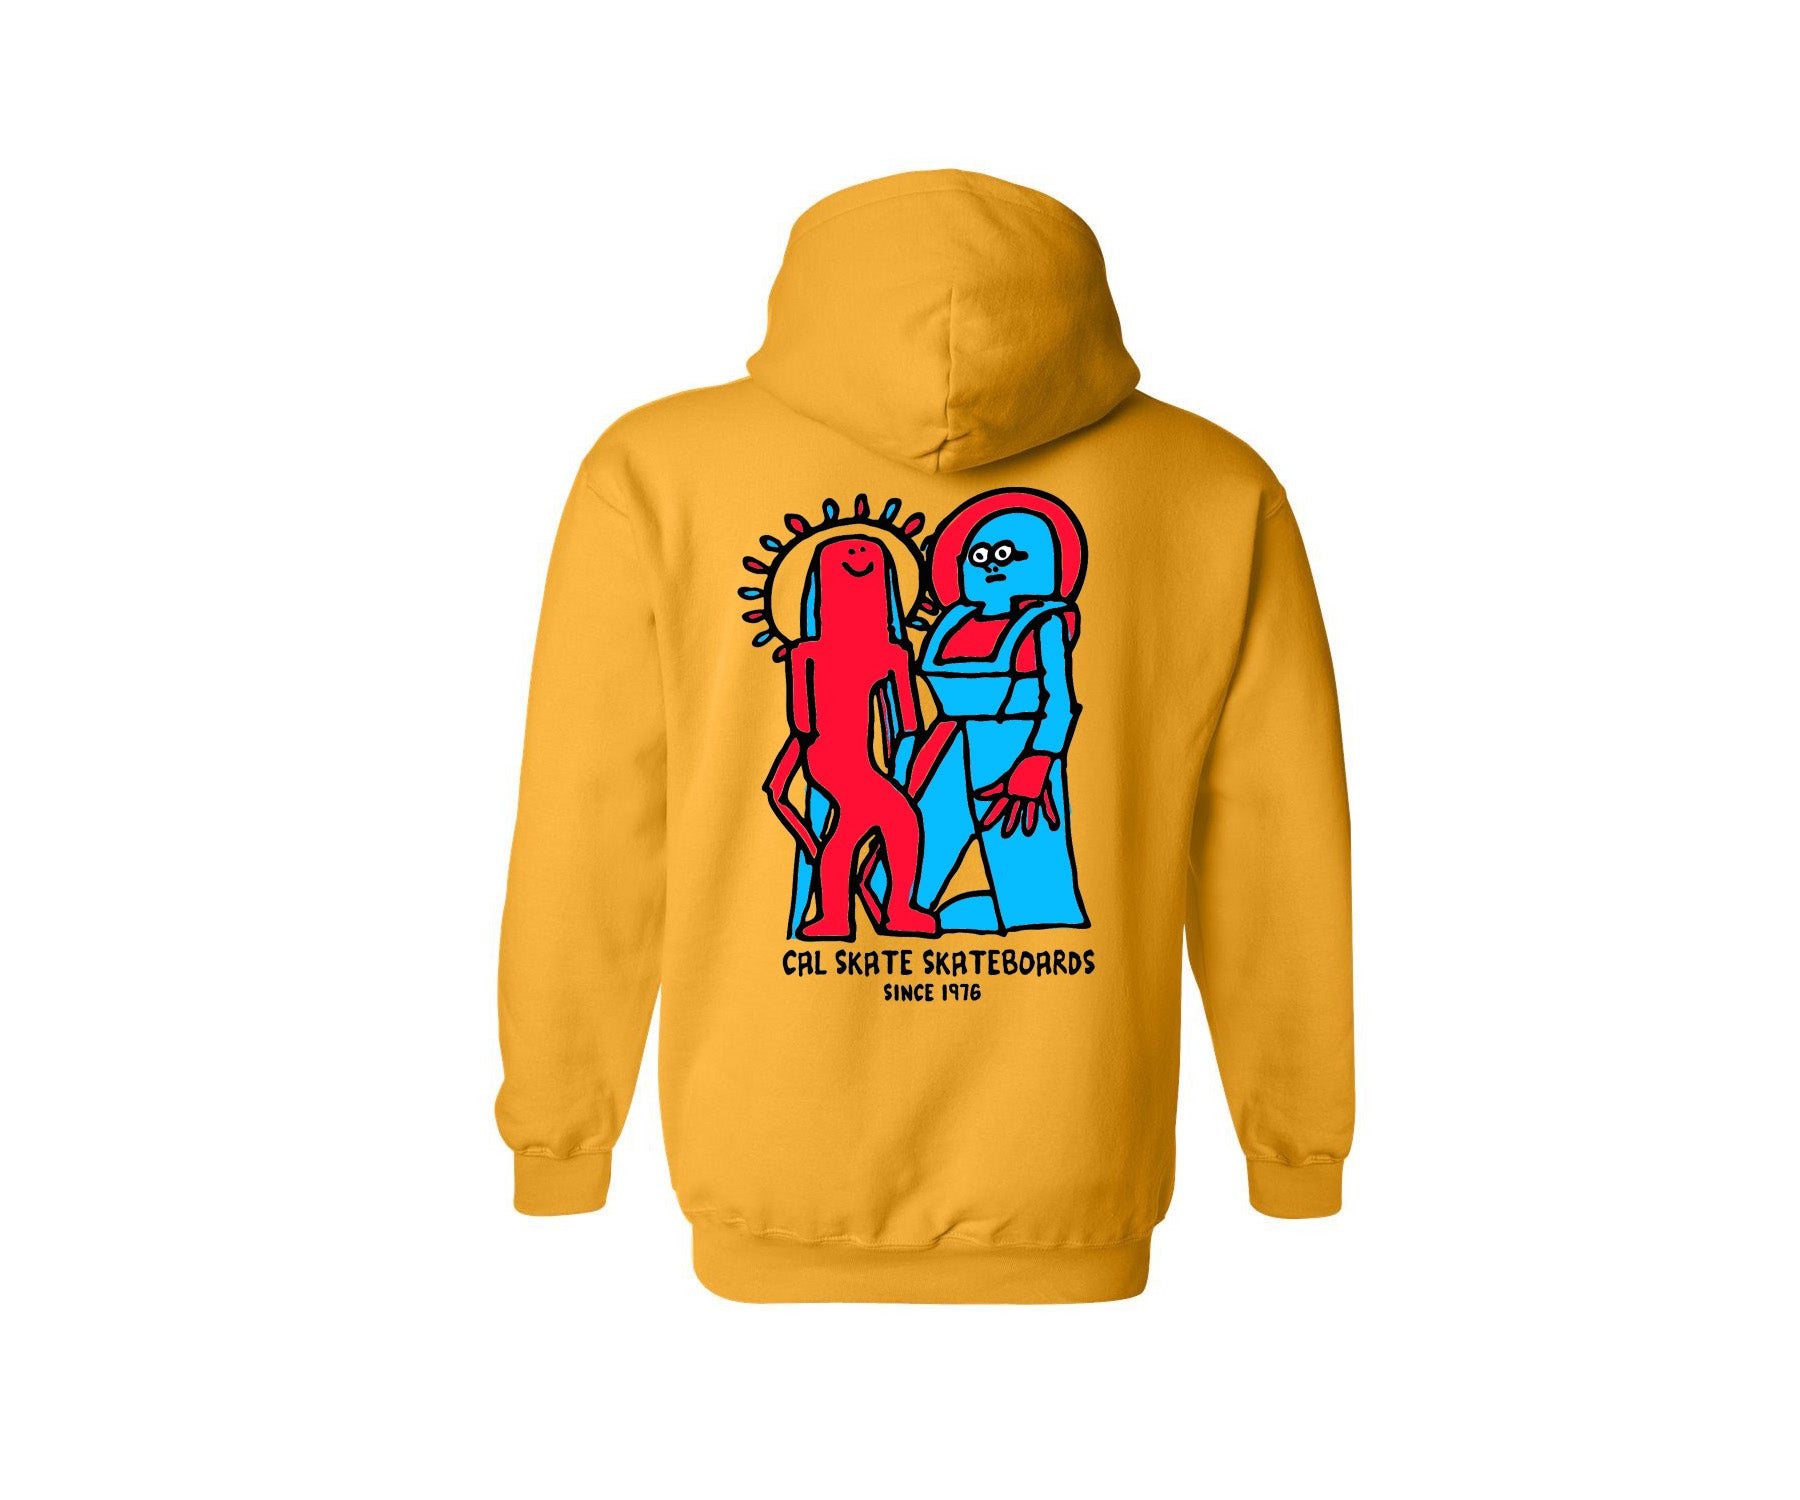 Cal Skate "No Higher Praise- Mark Gonzales" Yellow Pull Over Hoody